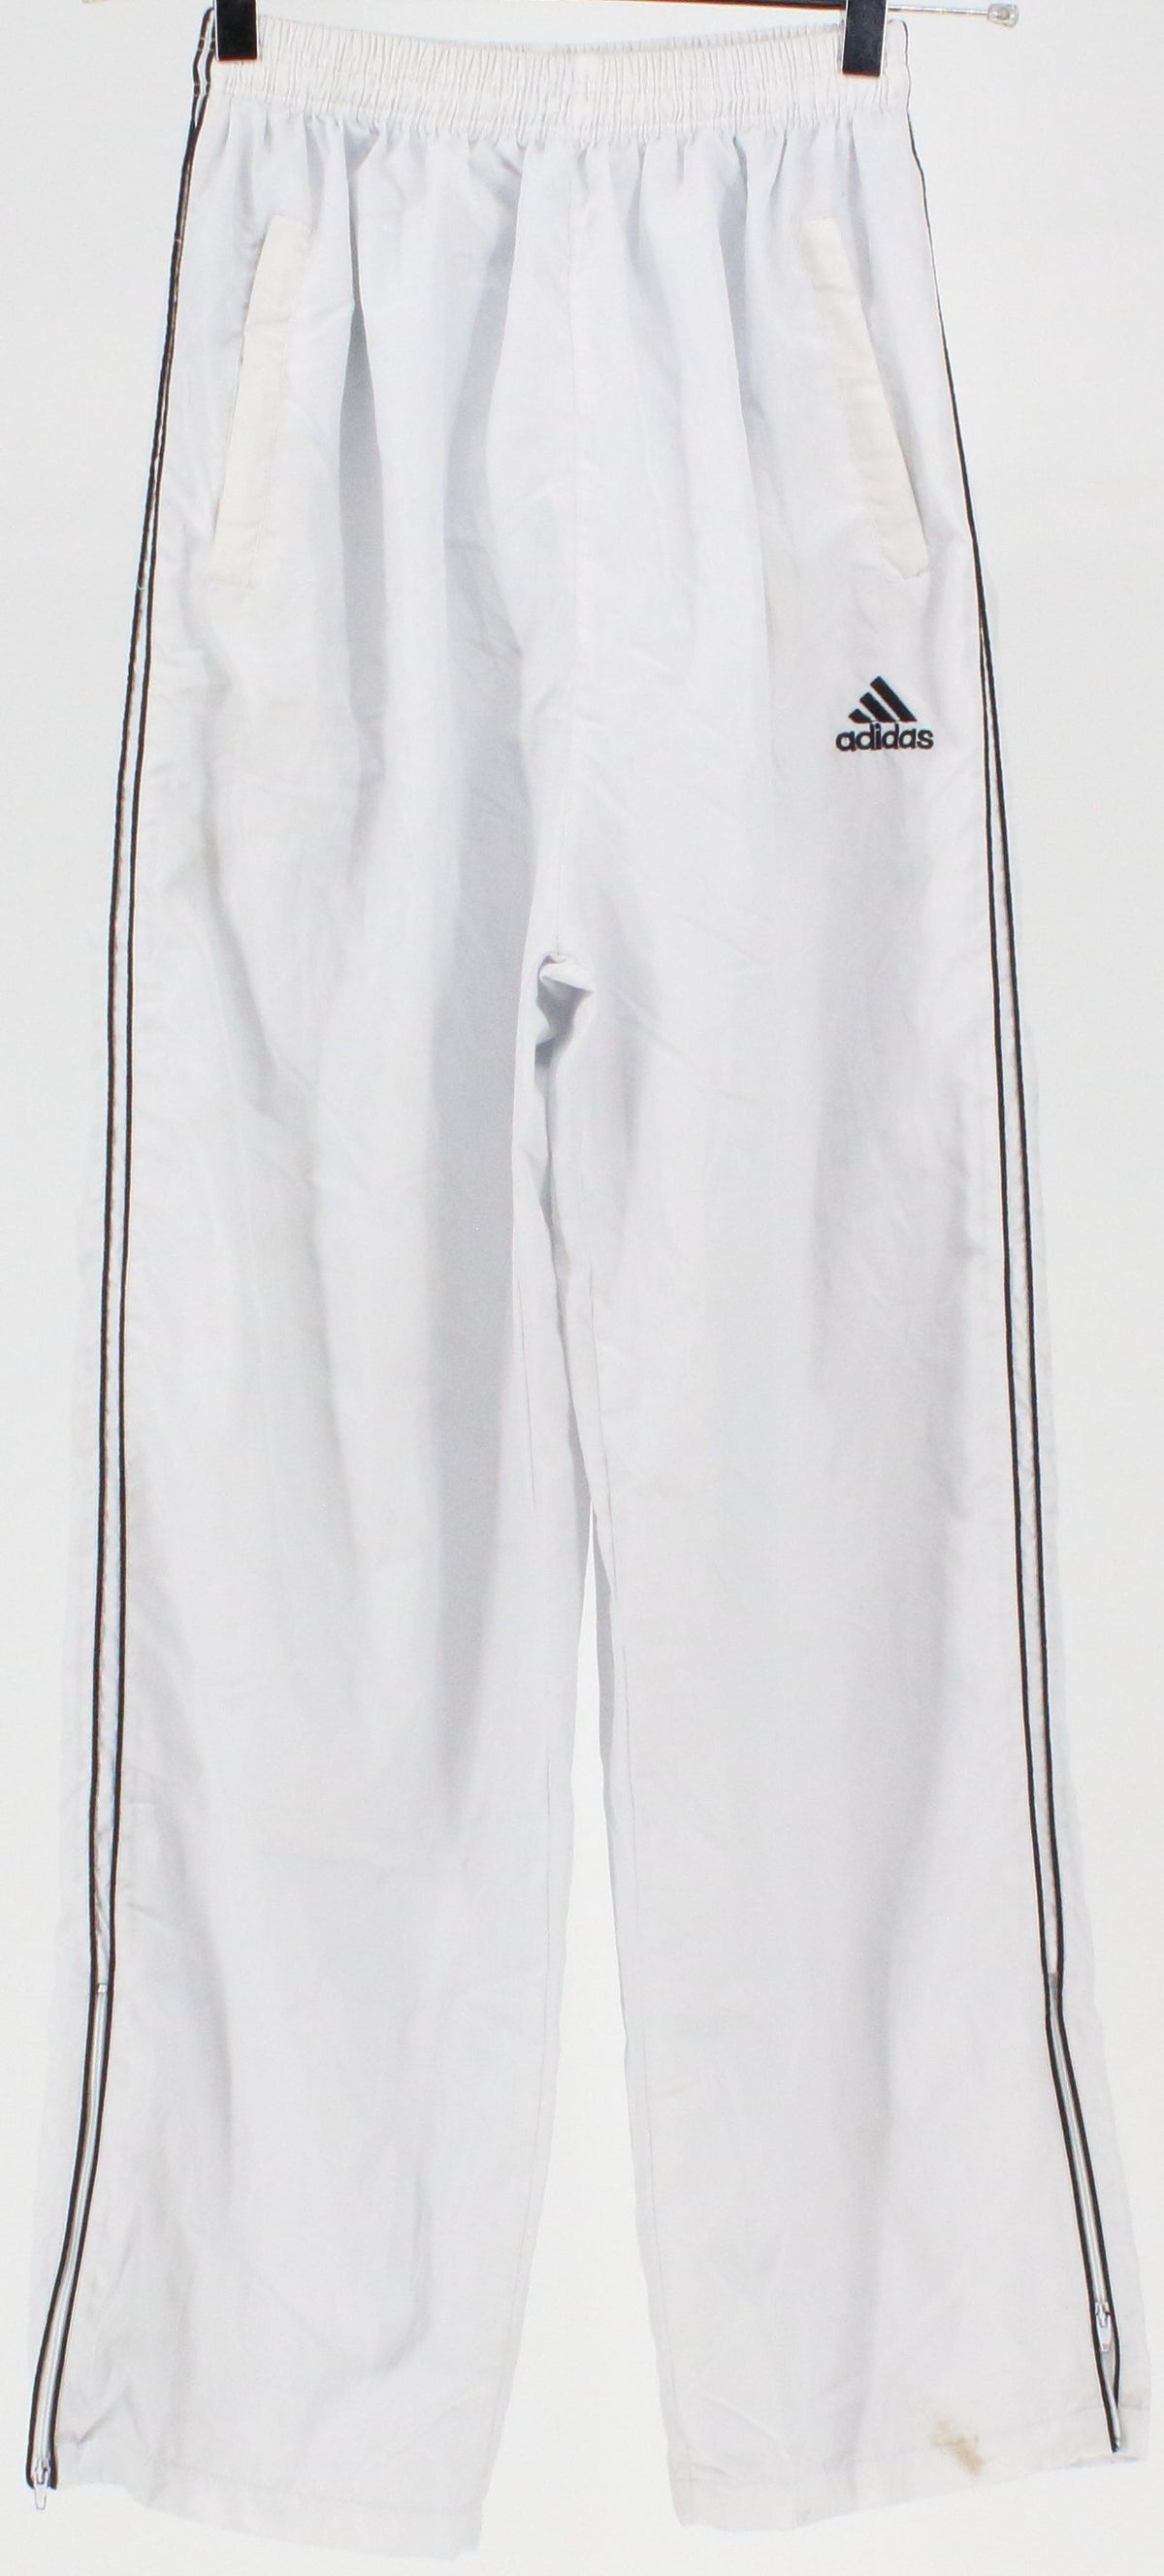 Adidas White Kids Pants With Black Piping Sides